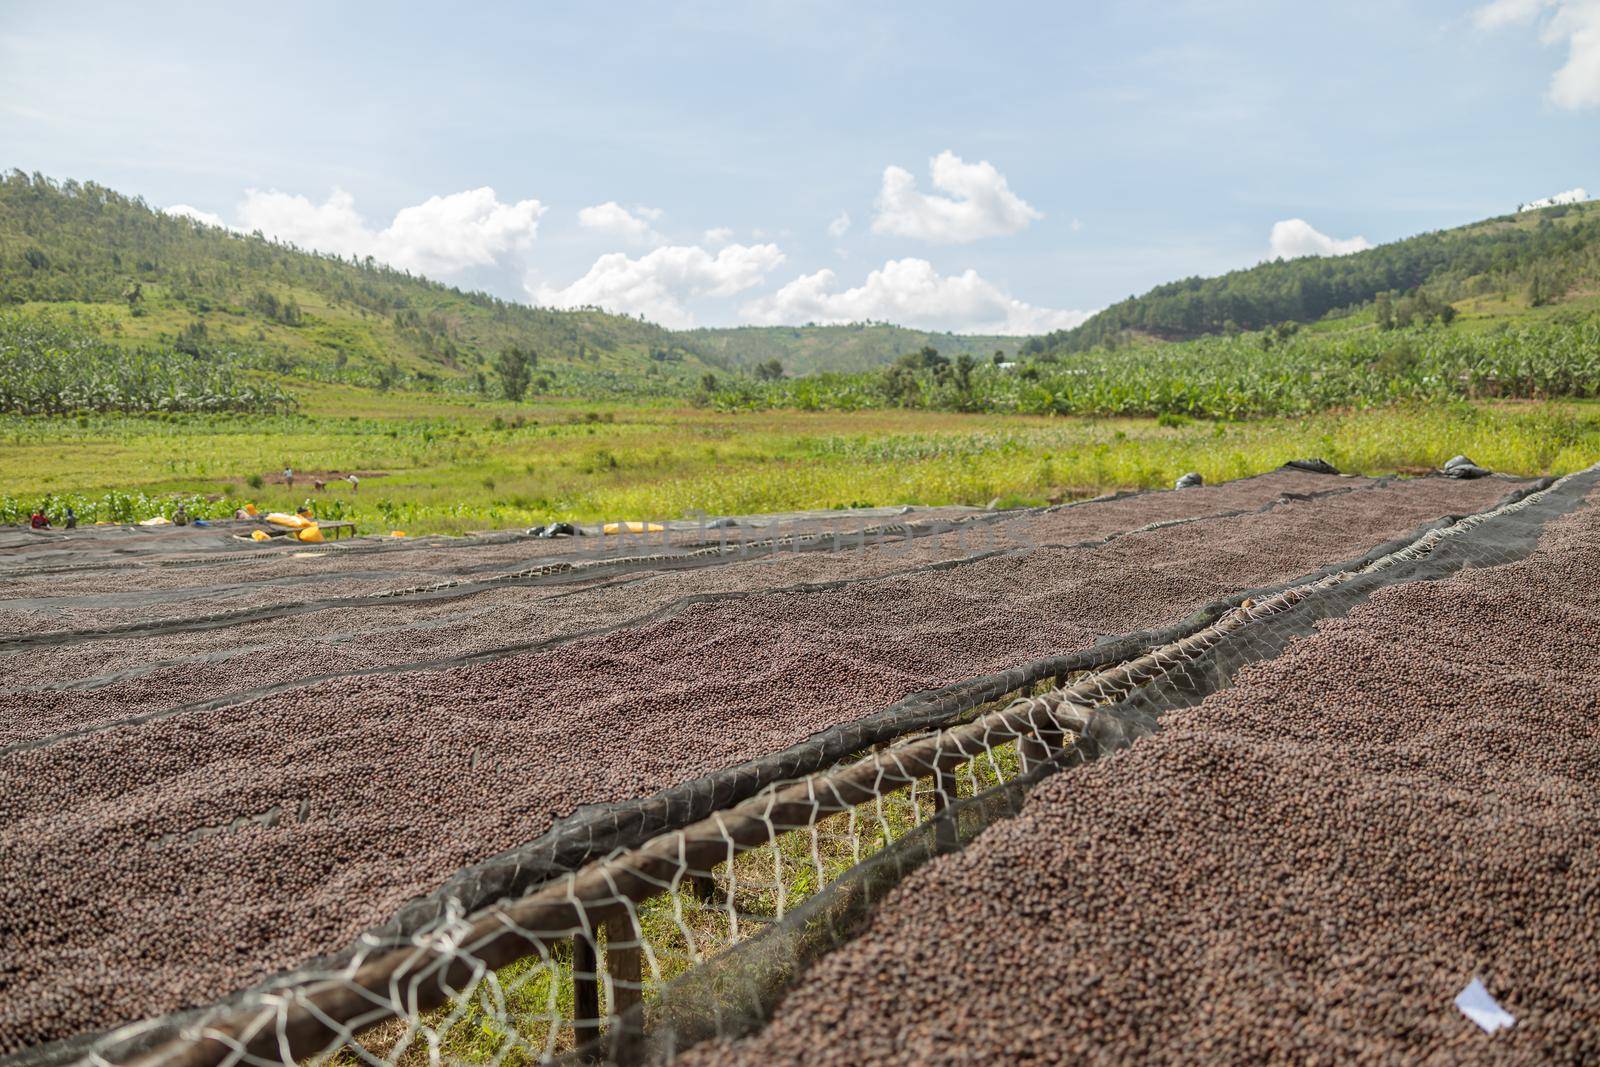 Coffee beans on special tables drying in the sun at coffee farm in Africa outdoors